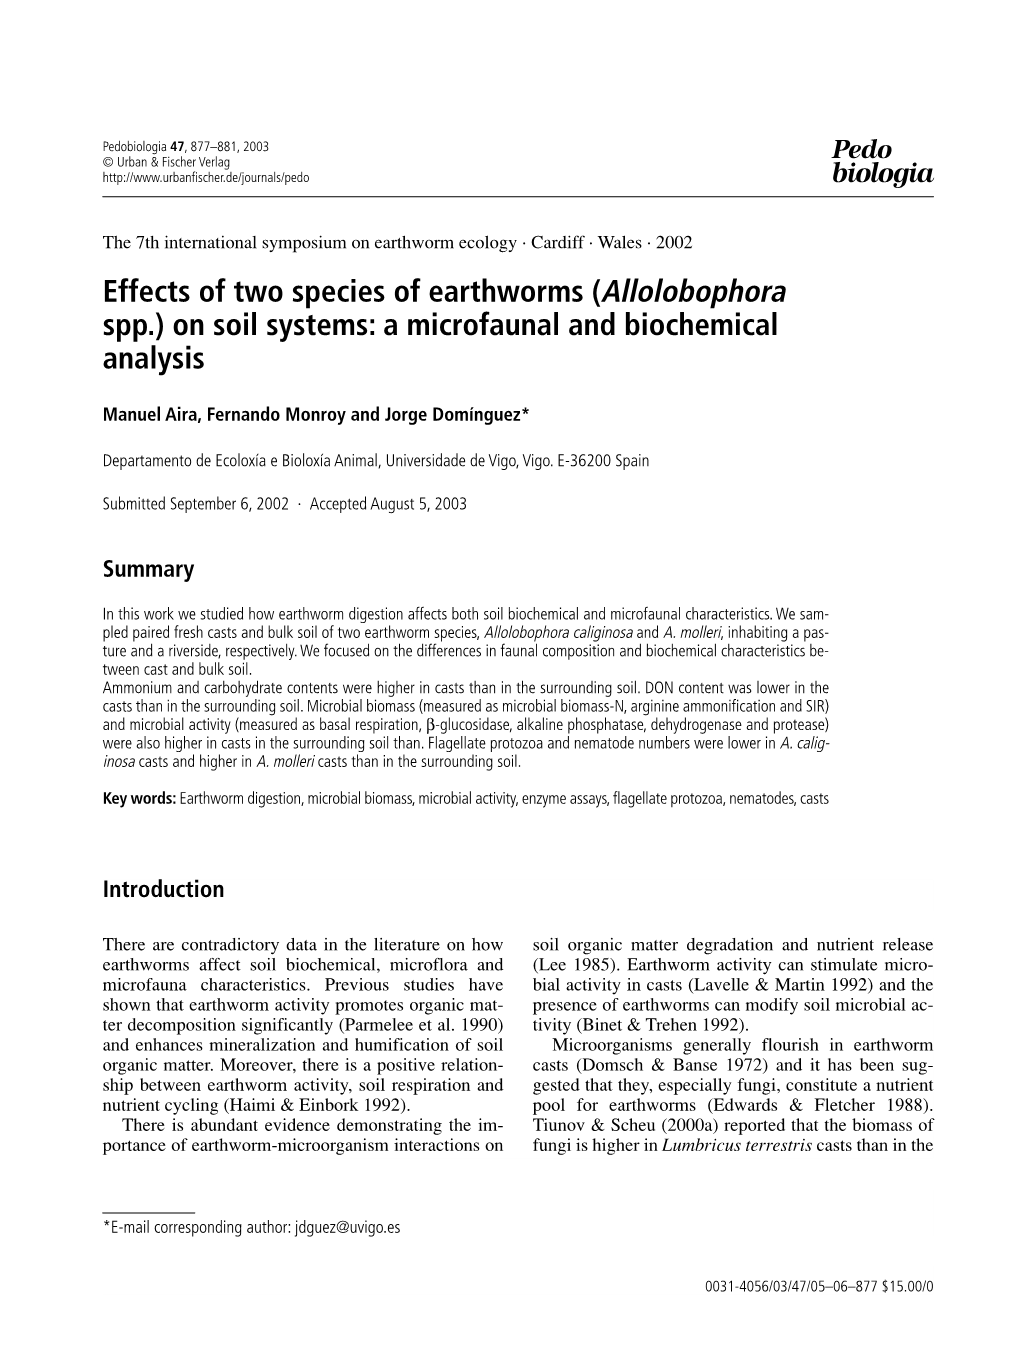 Effects of Two Species of Earthworms (Allolobophora Spp.) on Soil Systems: a Microfaunal and Biochemical Analysis